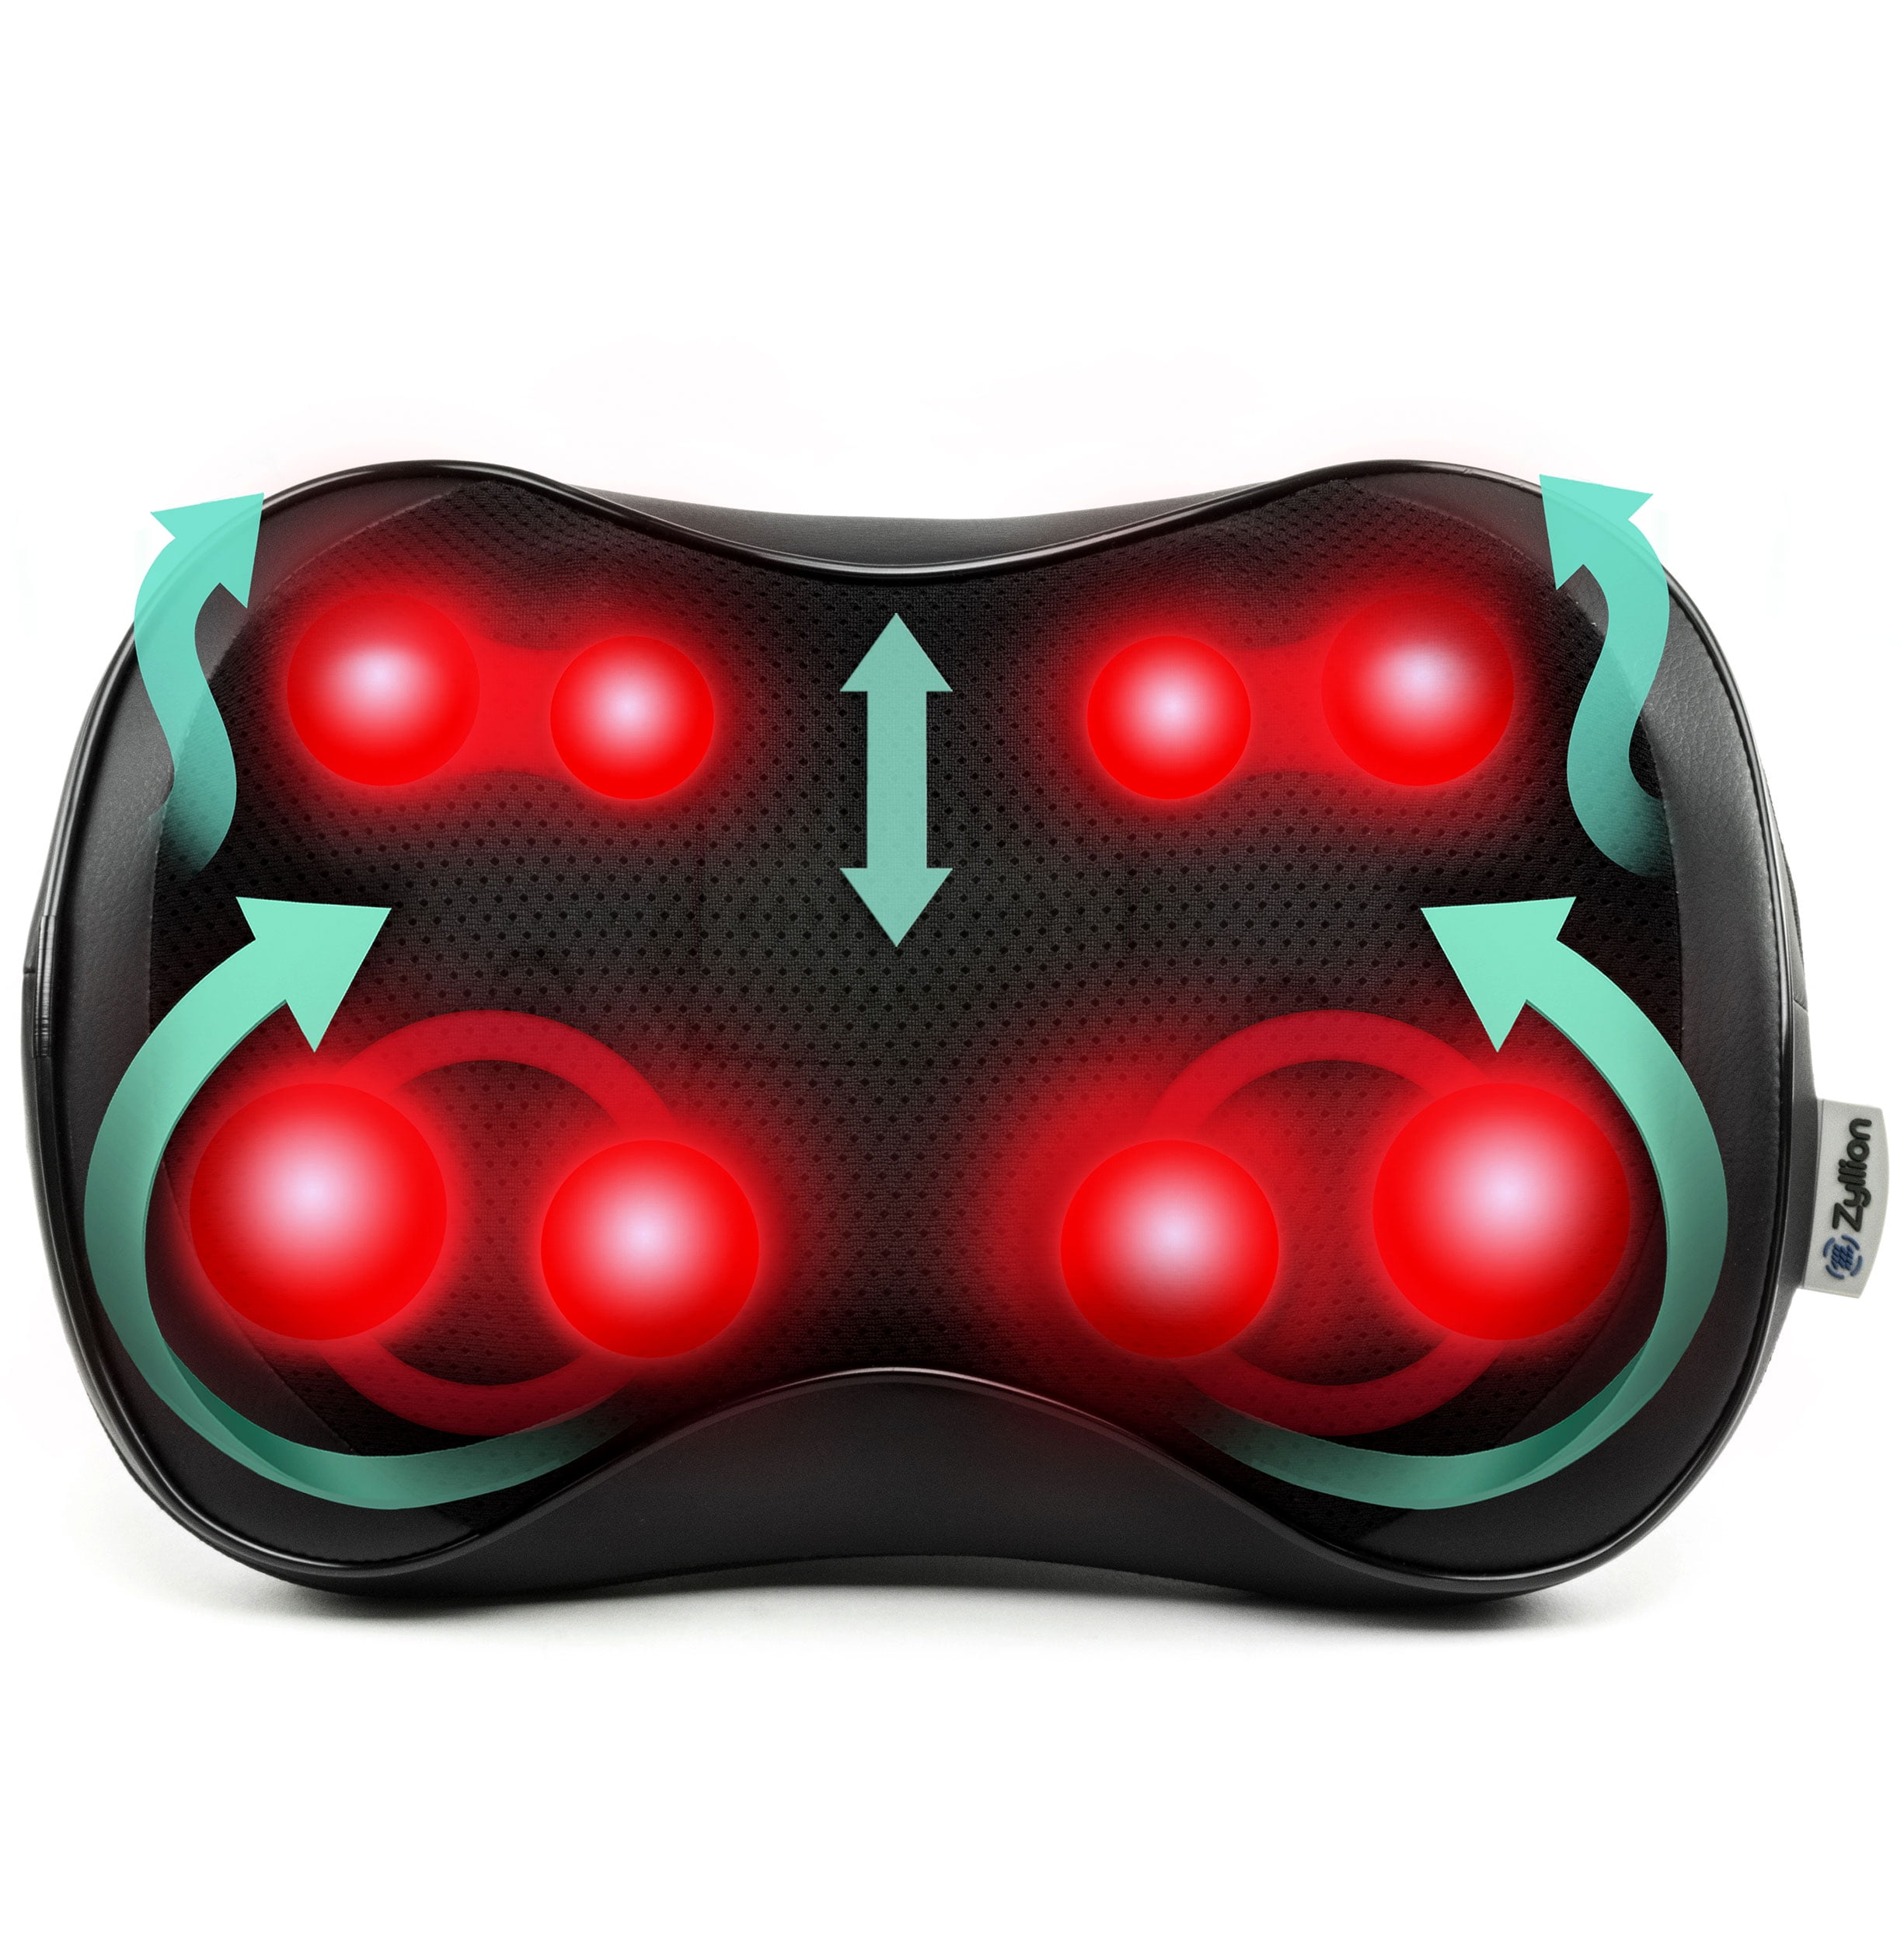  Zyllion Shiatsu Back and Neck Massager - Rechargeable 3D  Kneading Deep Tissue Massage Pillow with Heat for Muscle Pain Relief,  Chairs and Cars (Cordless) - Black (ZMA-13RB-BK) : Health & Household